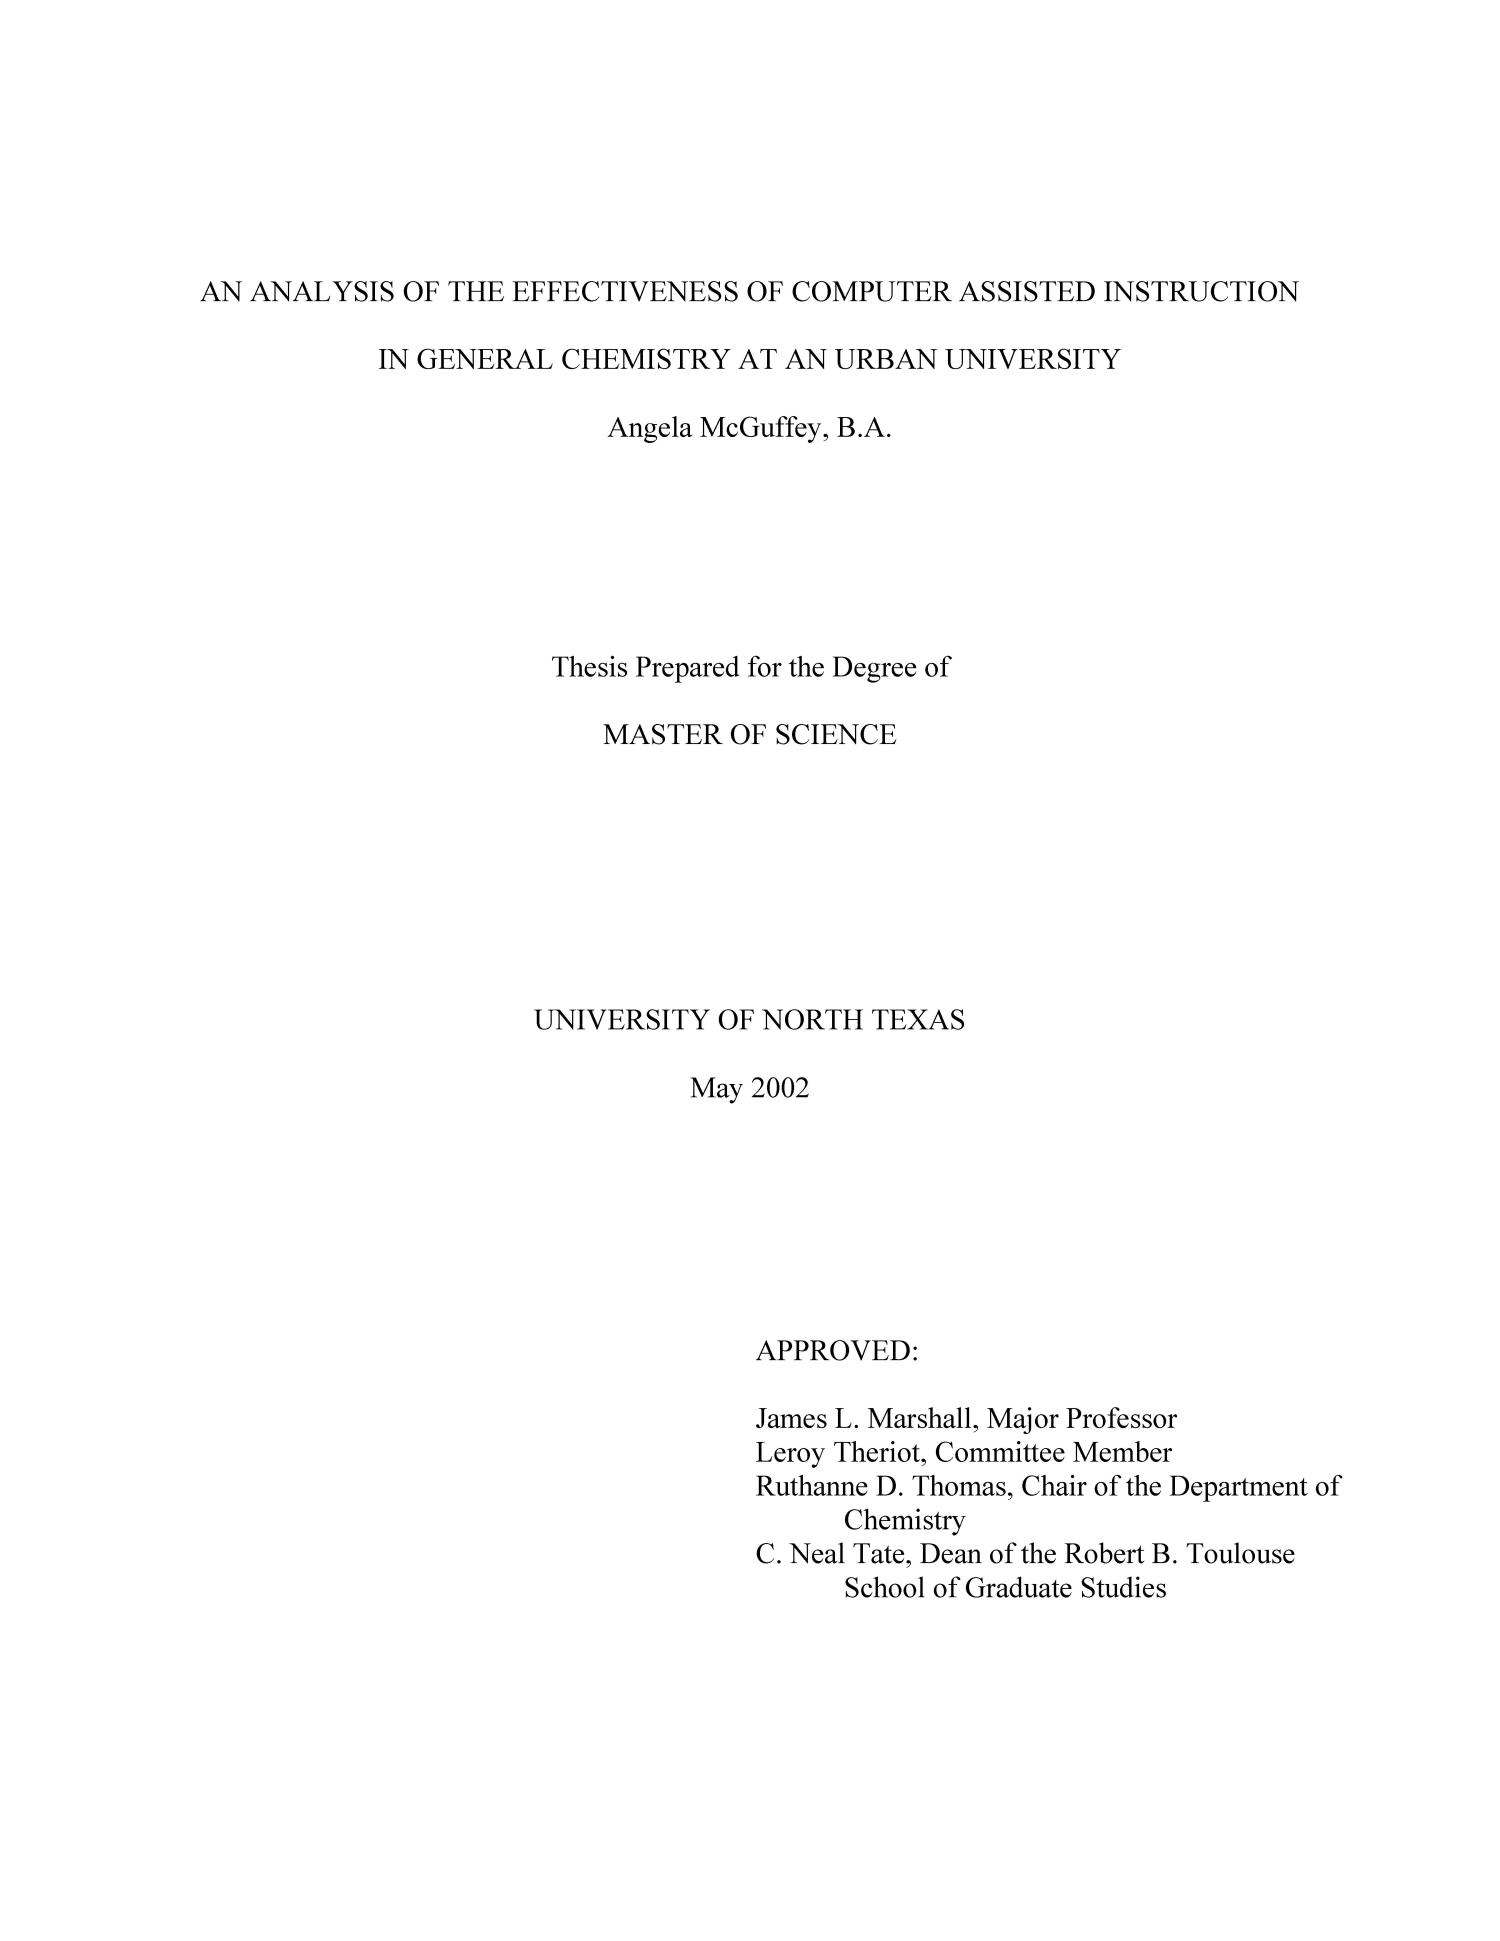 An Analysis of the Effectiveness of Computer Assisted Instruction in General Chemistry at an Urban University.
                                                
                                                    Title Page
                                                